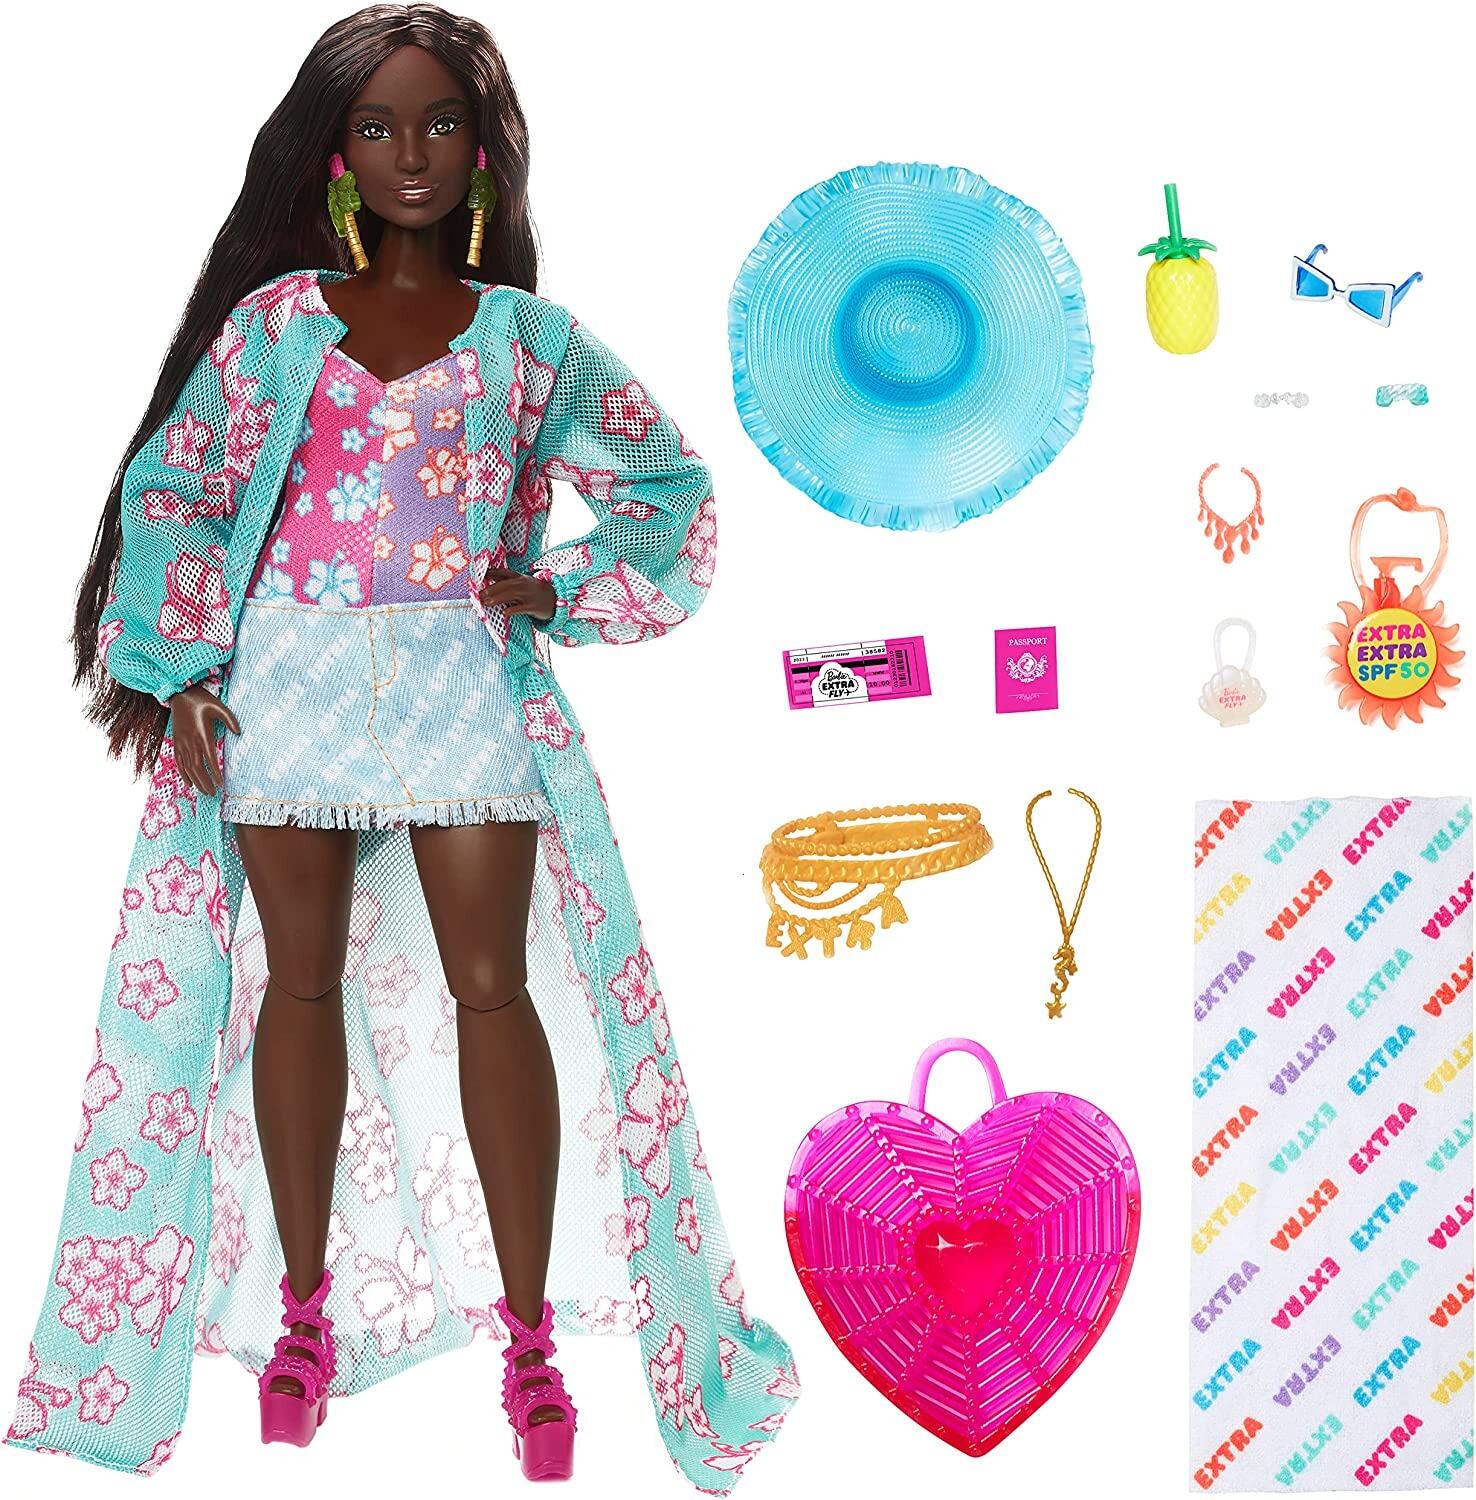 Barbie Extra Fly, Hat and Tropical Coverup with Oversized Bag, Travel Barbie Doll with Beach Fashion